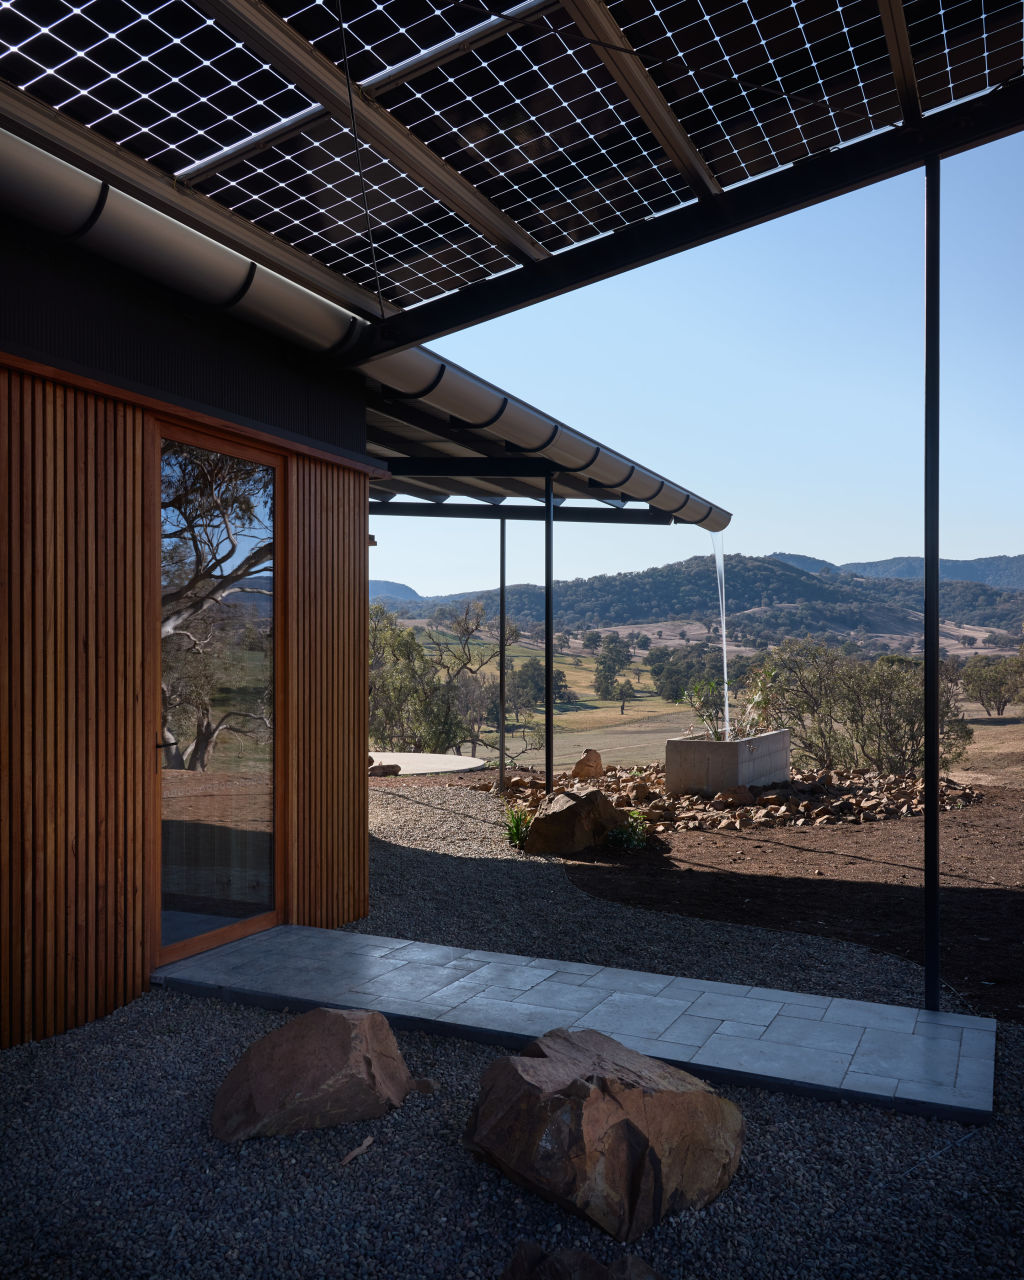 Solar panels that work on two faces form a unique roof. Photo: Barton Taylor